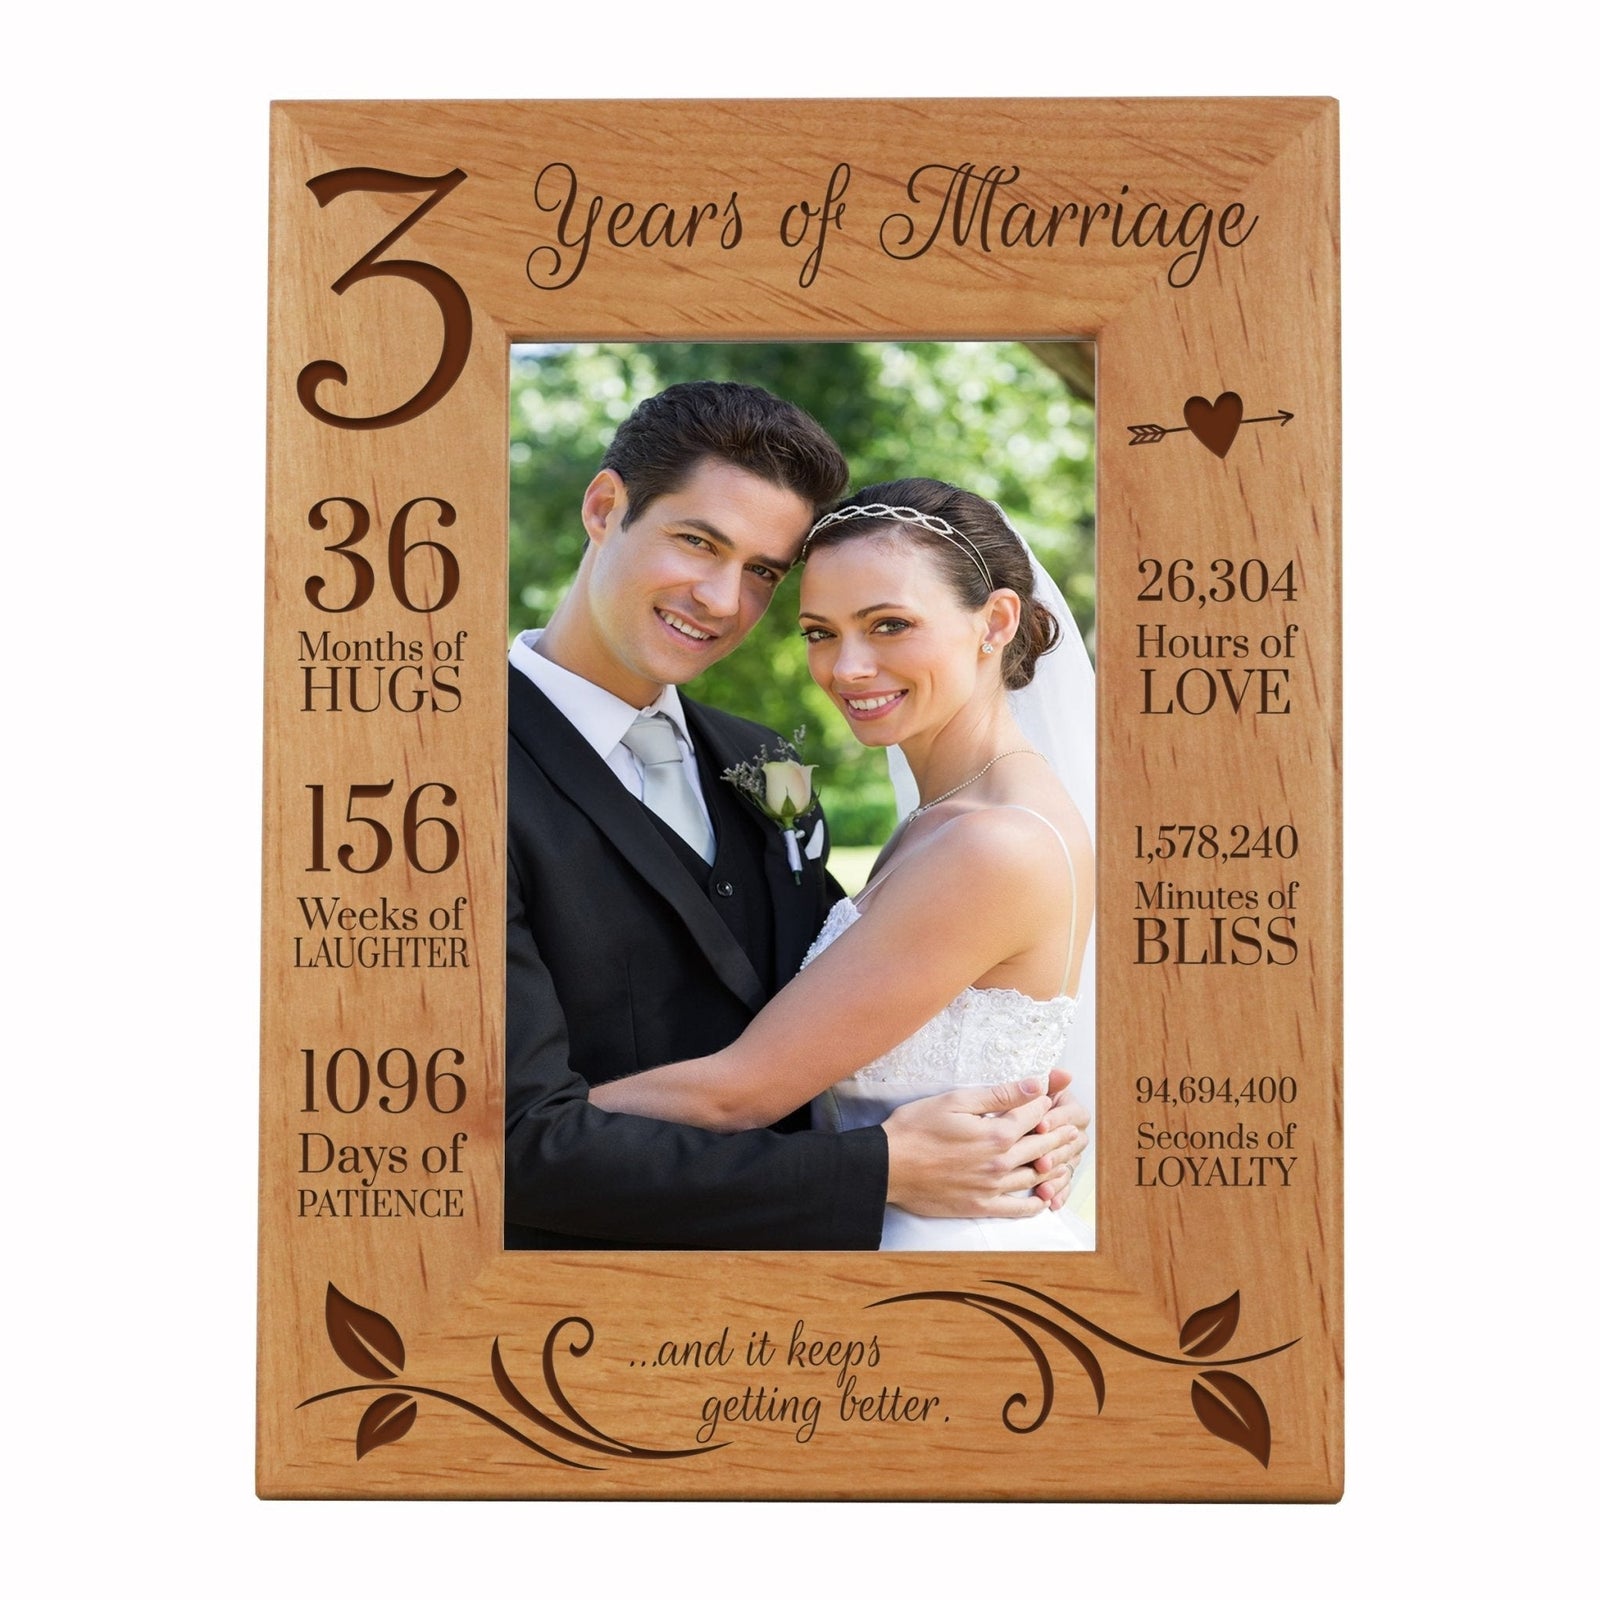 Engraved 3rd Anniversary Picture Frame Gift for Couples - Keeps Getting Better - LifeSong Milestones